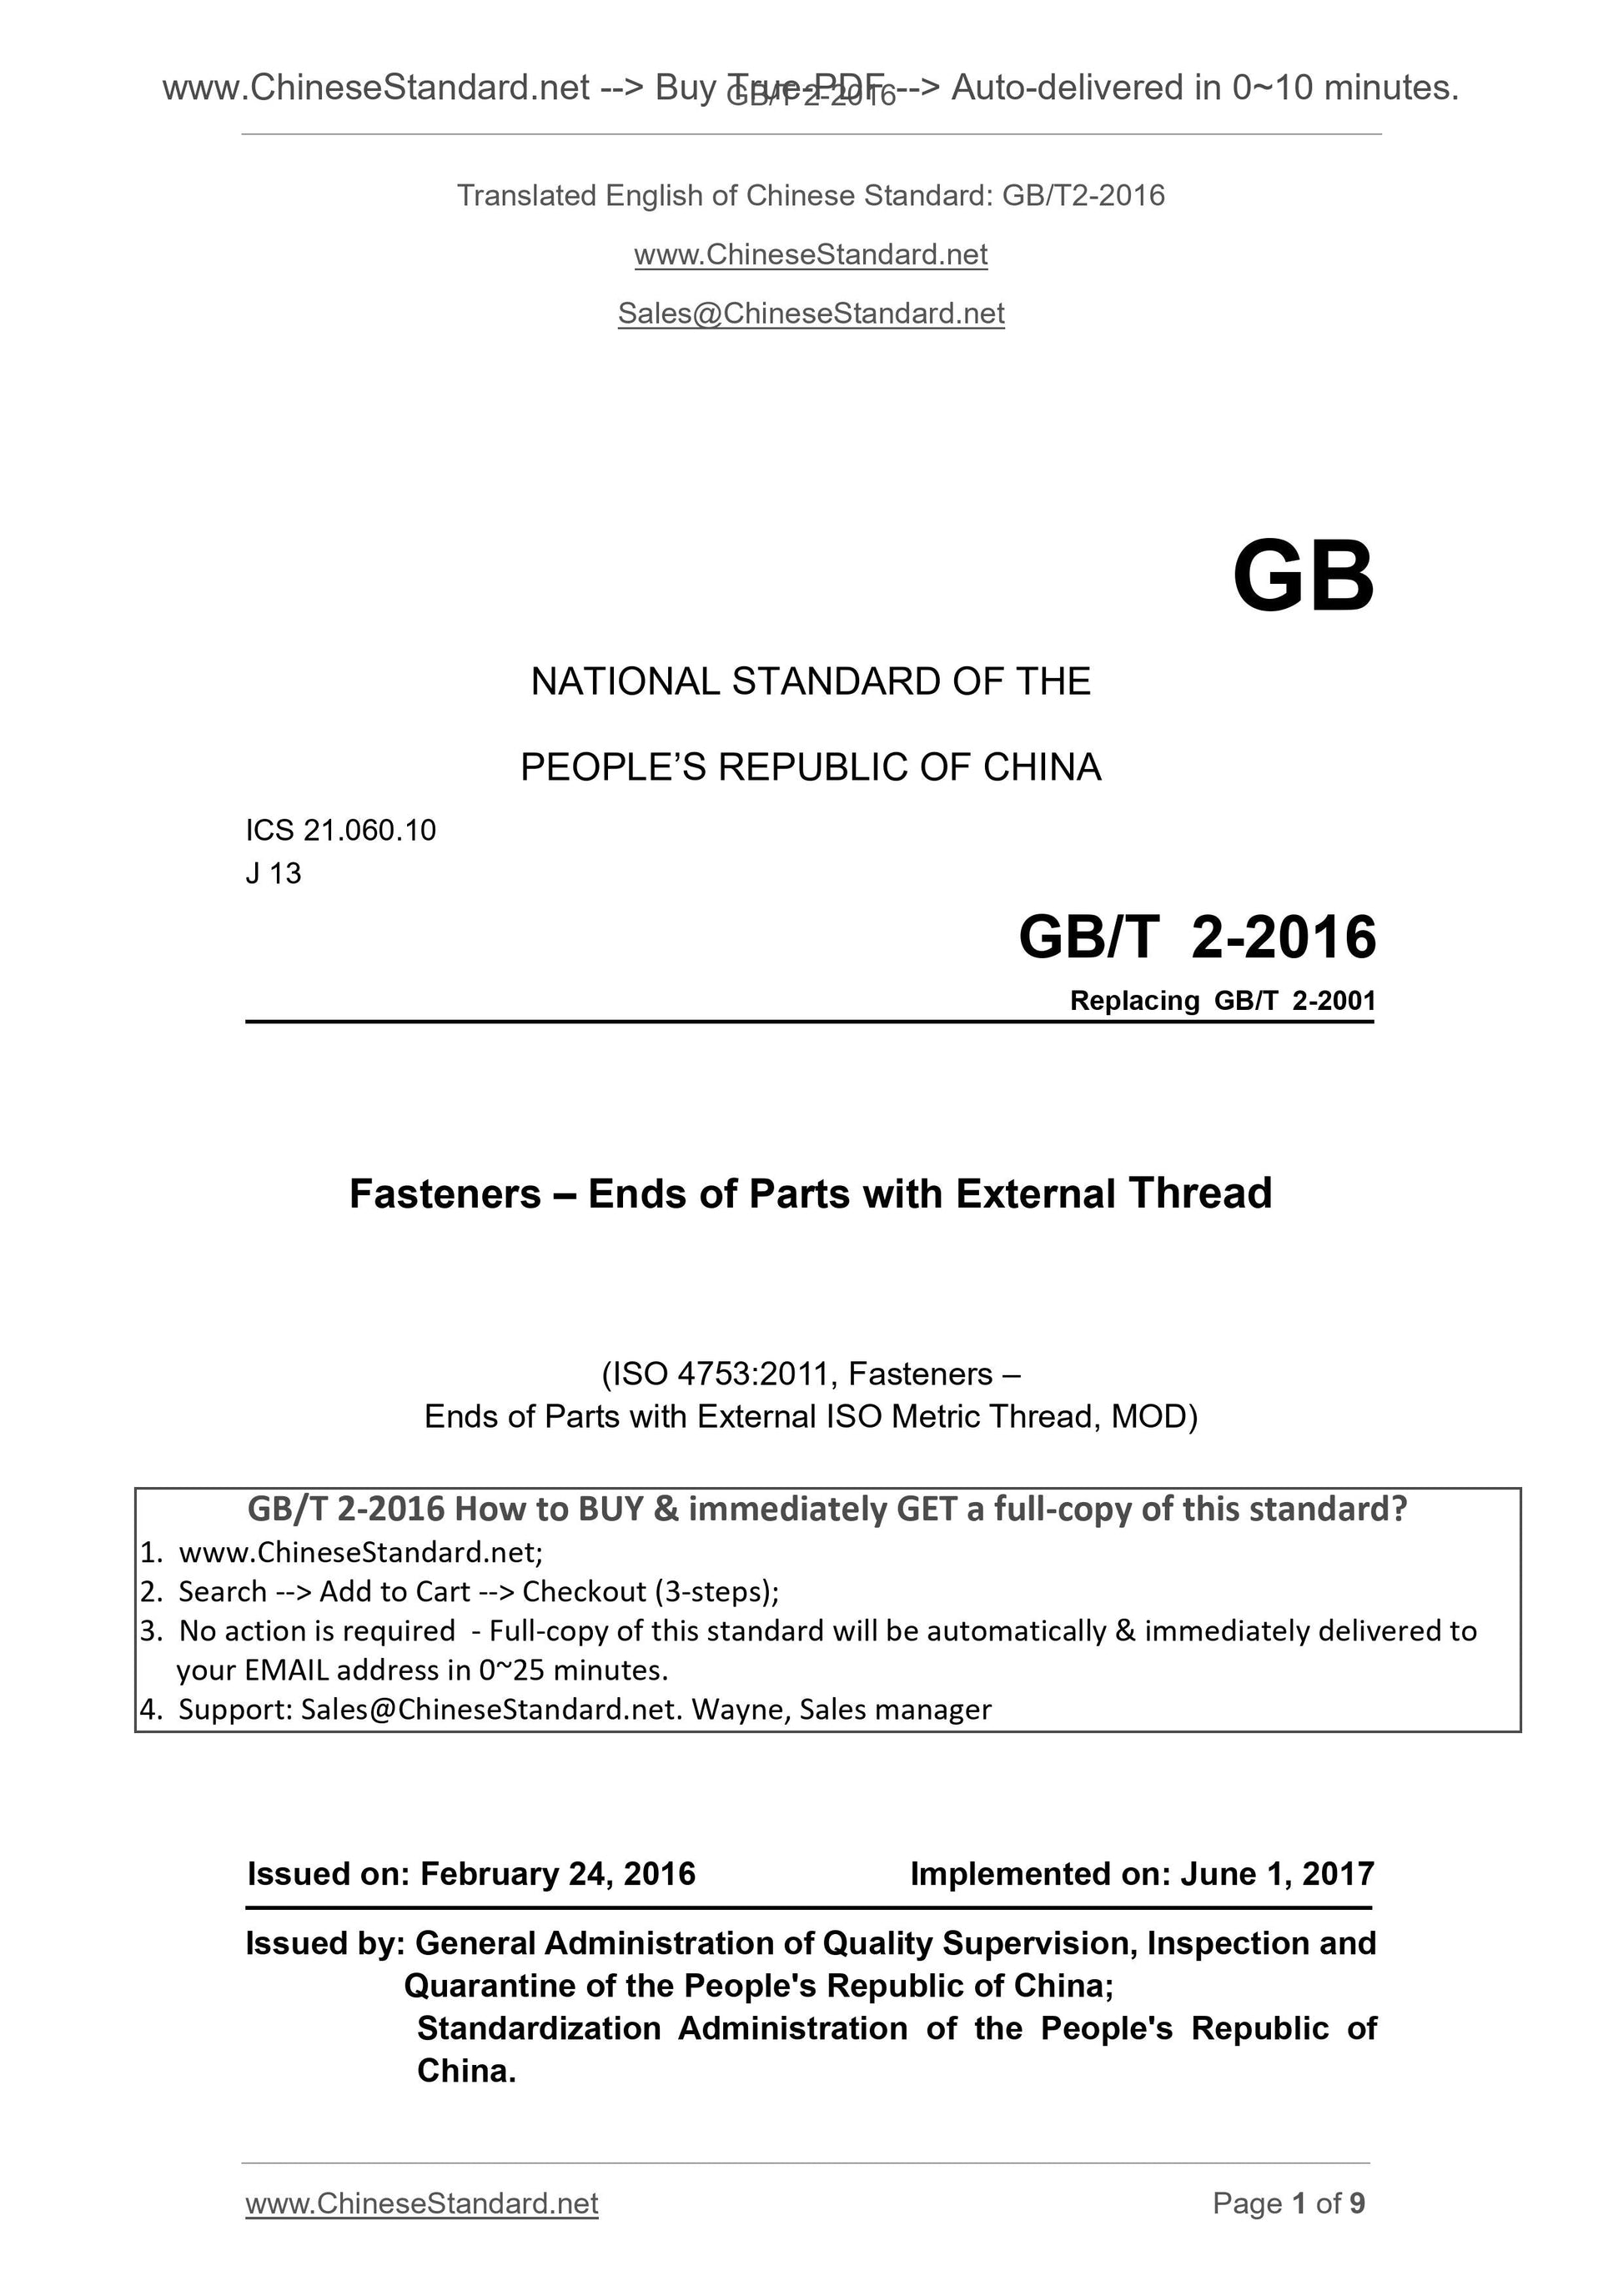 GB/T 2-2016 Page 1